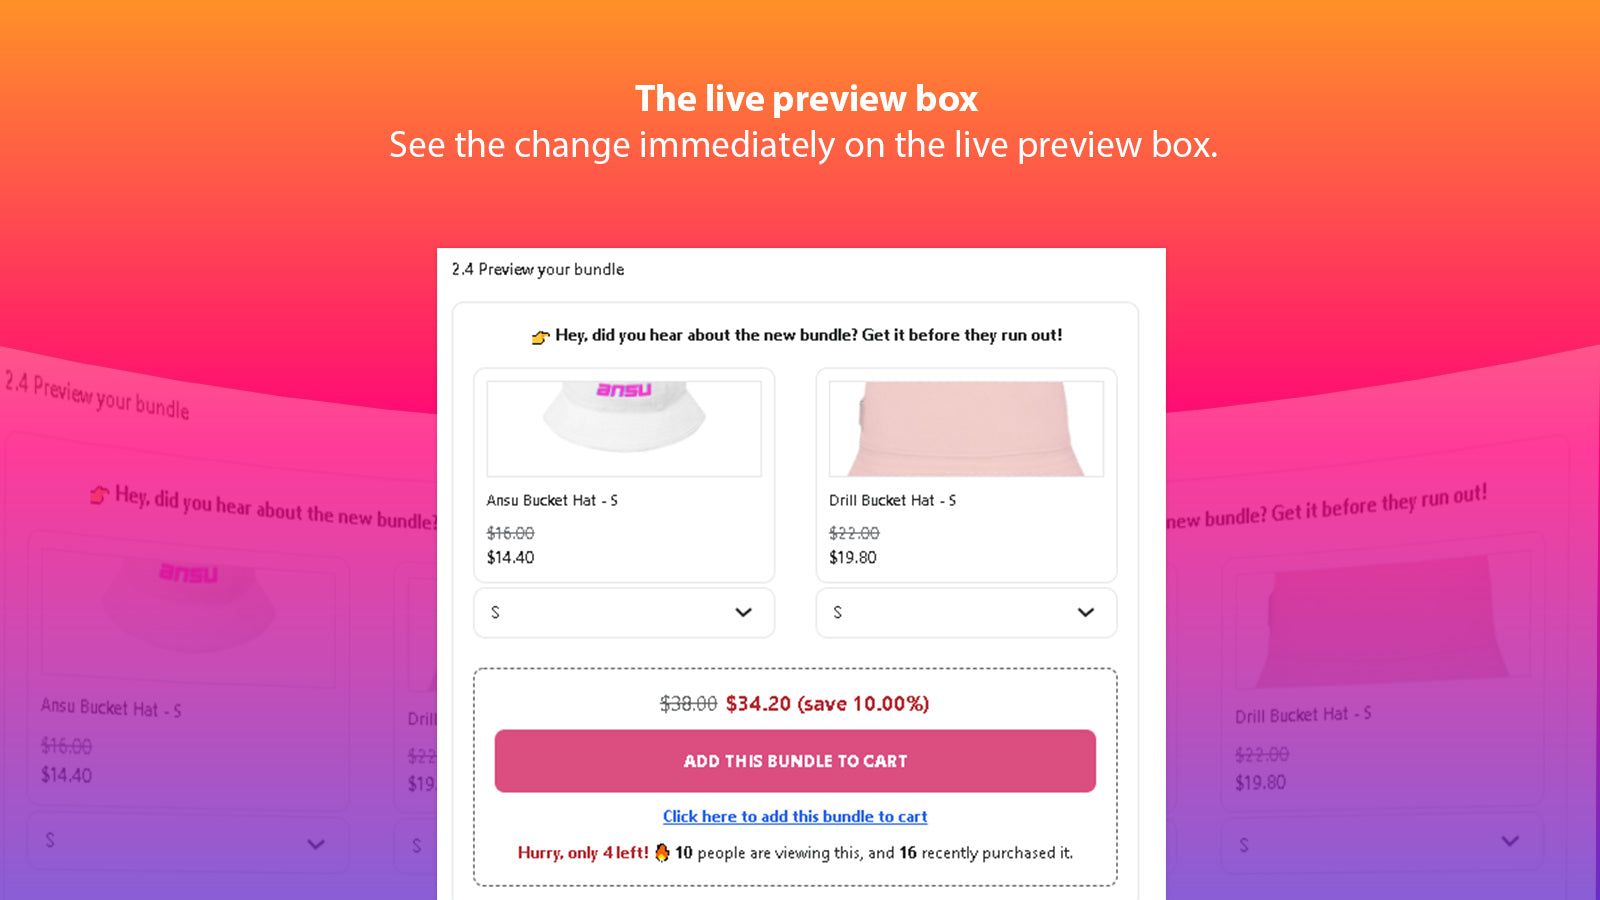 The live preview box